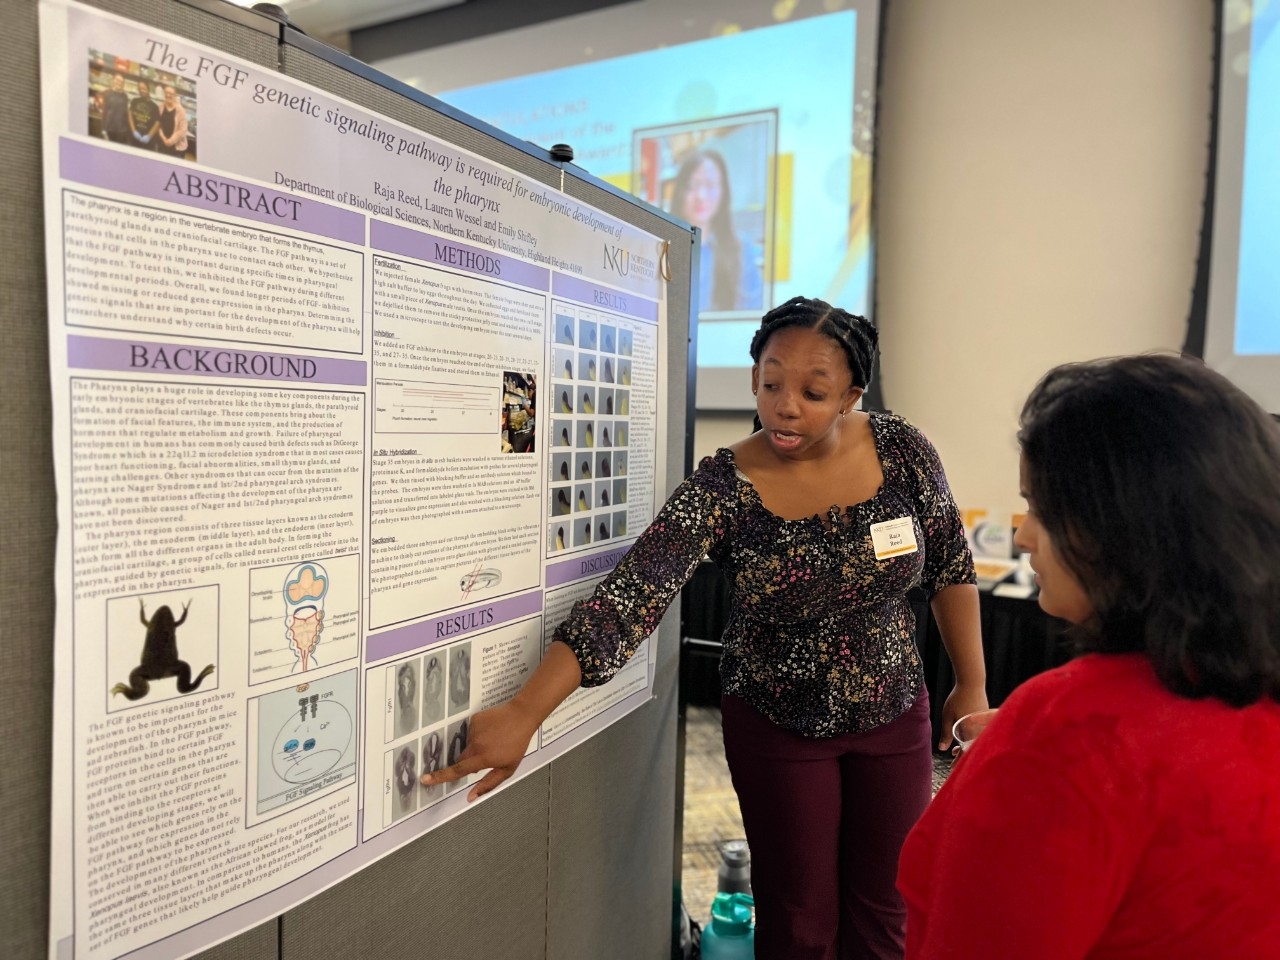 NKU student presents research poster to a visitor